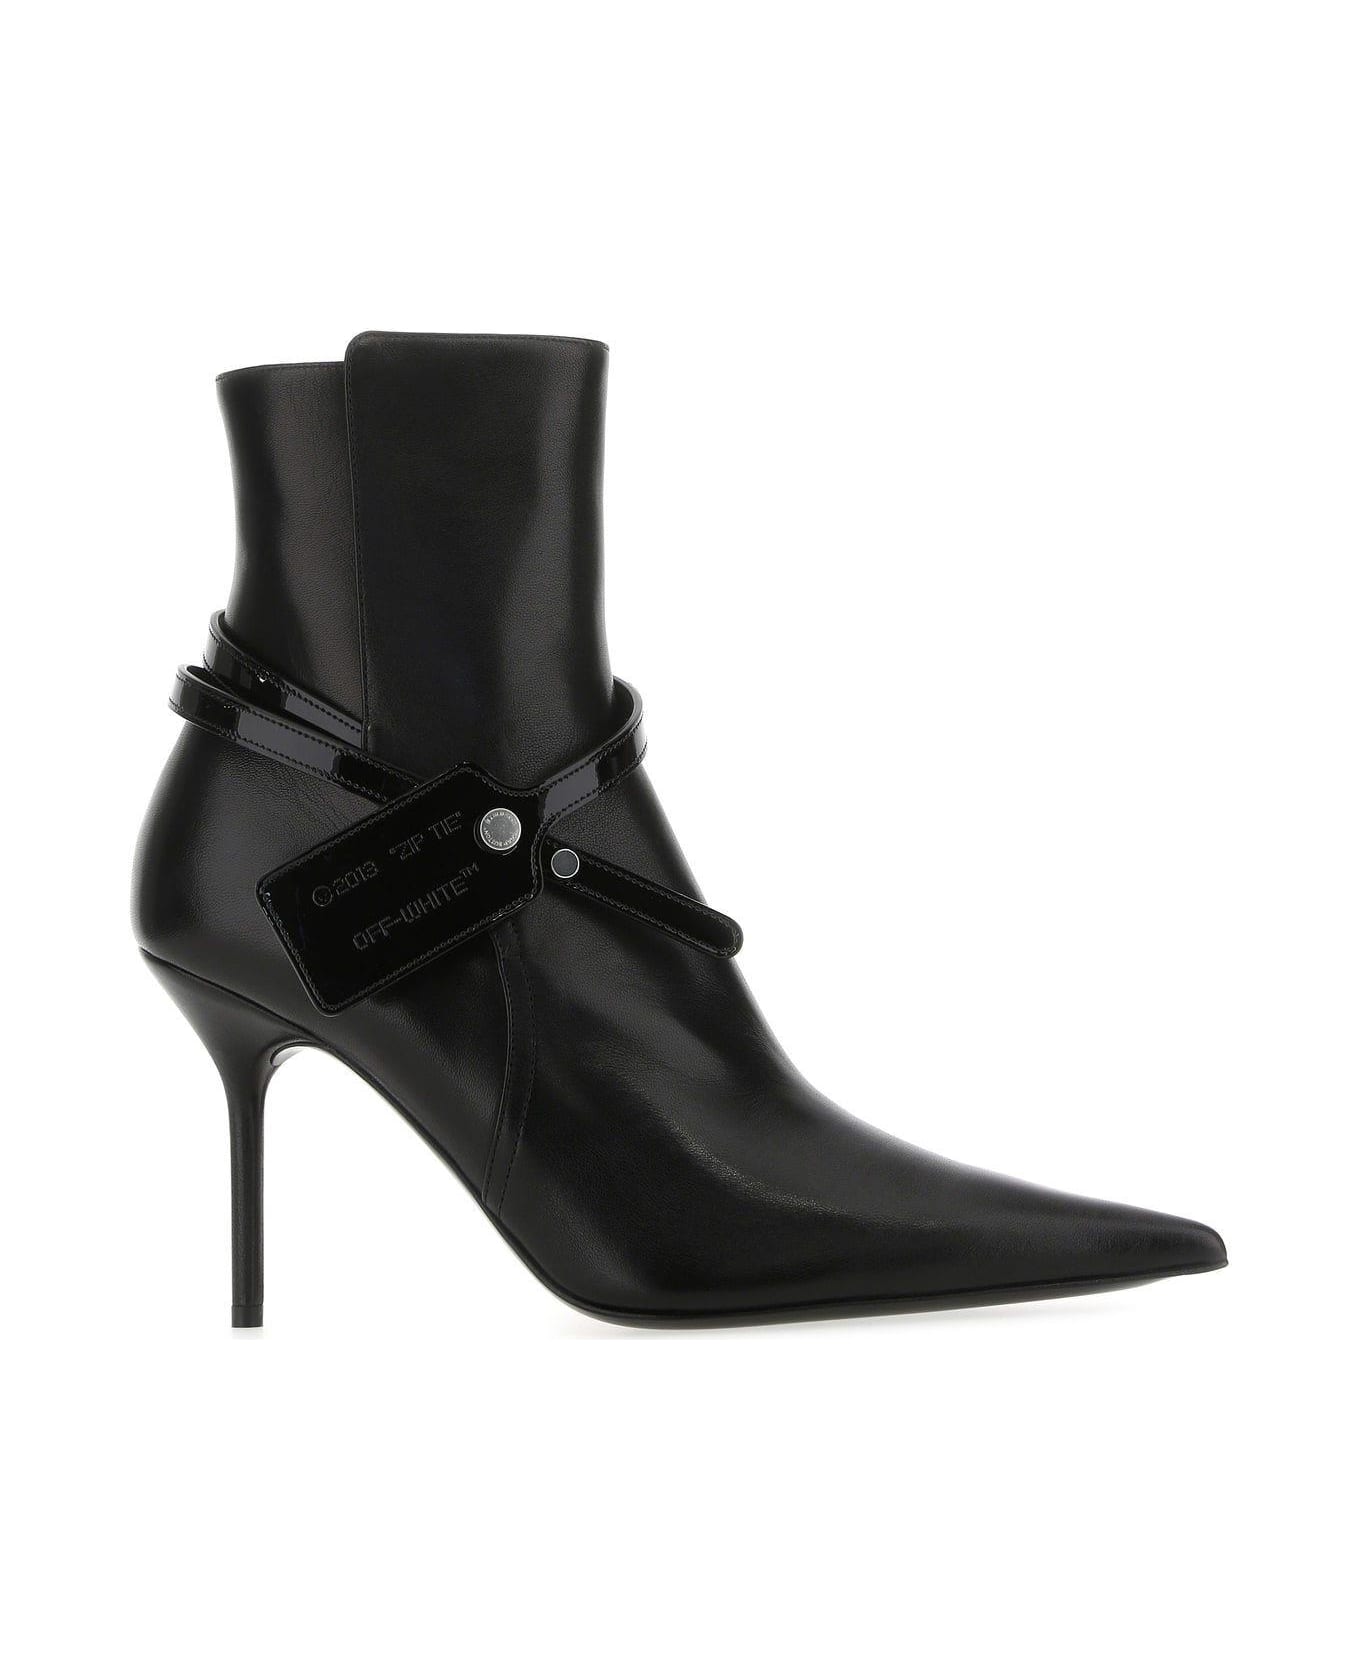 Off-White Black Leather Ankle Boots - Black